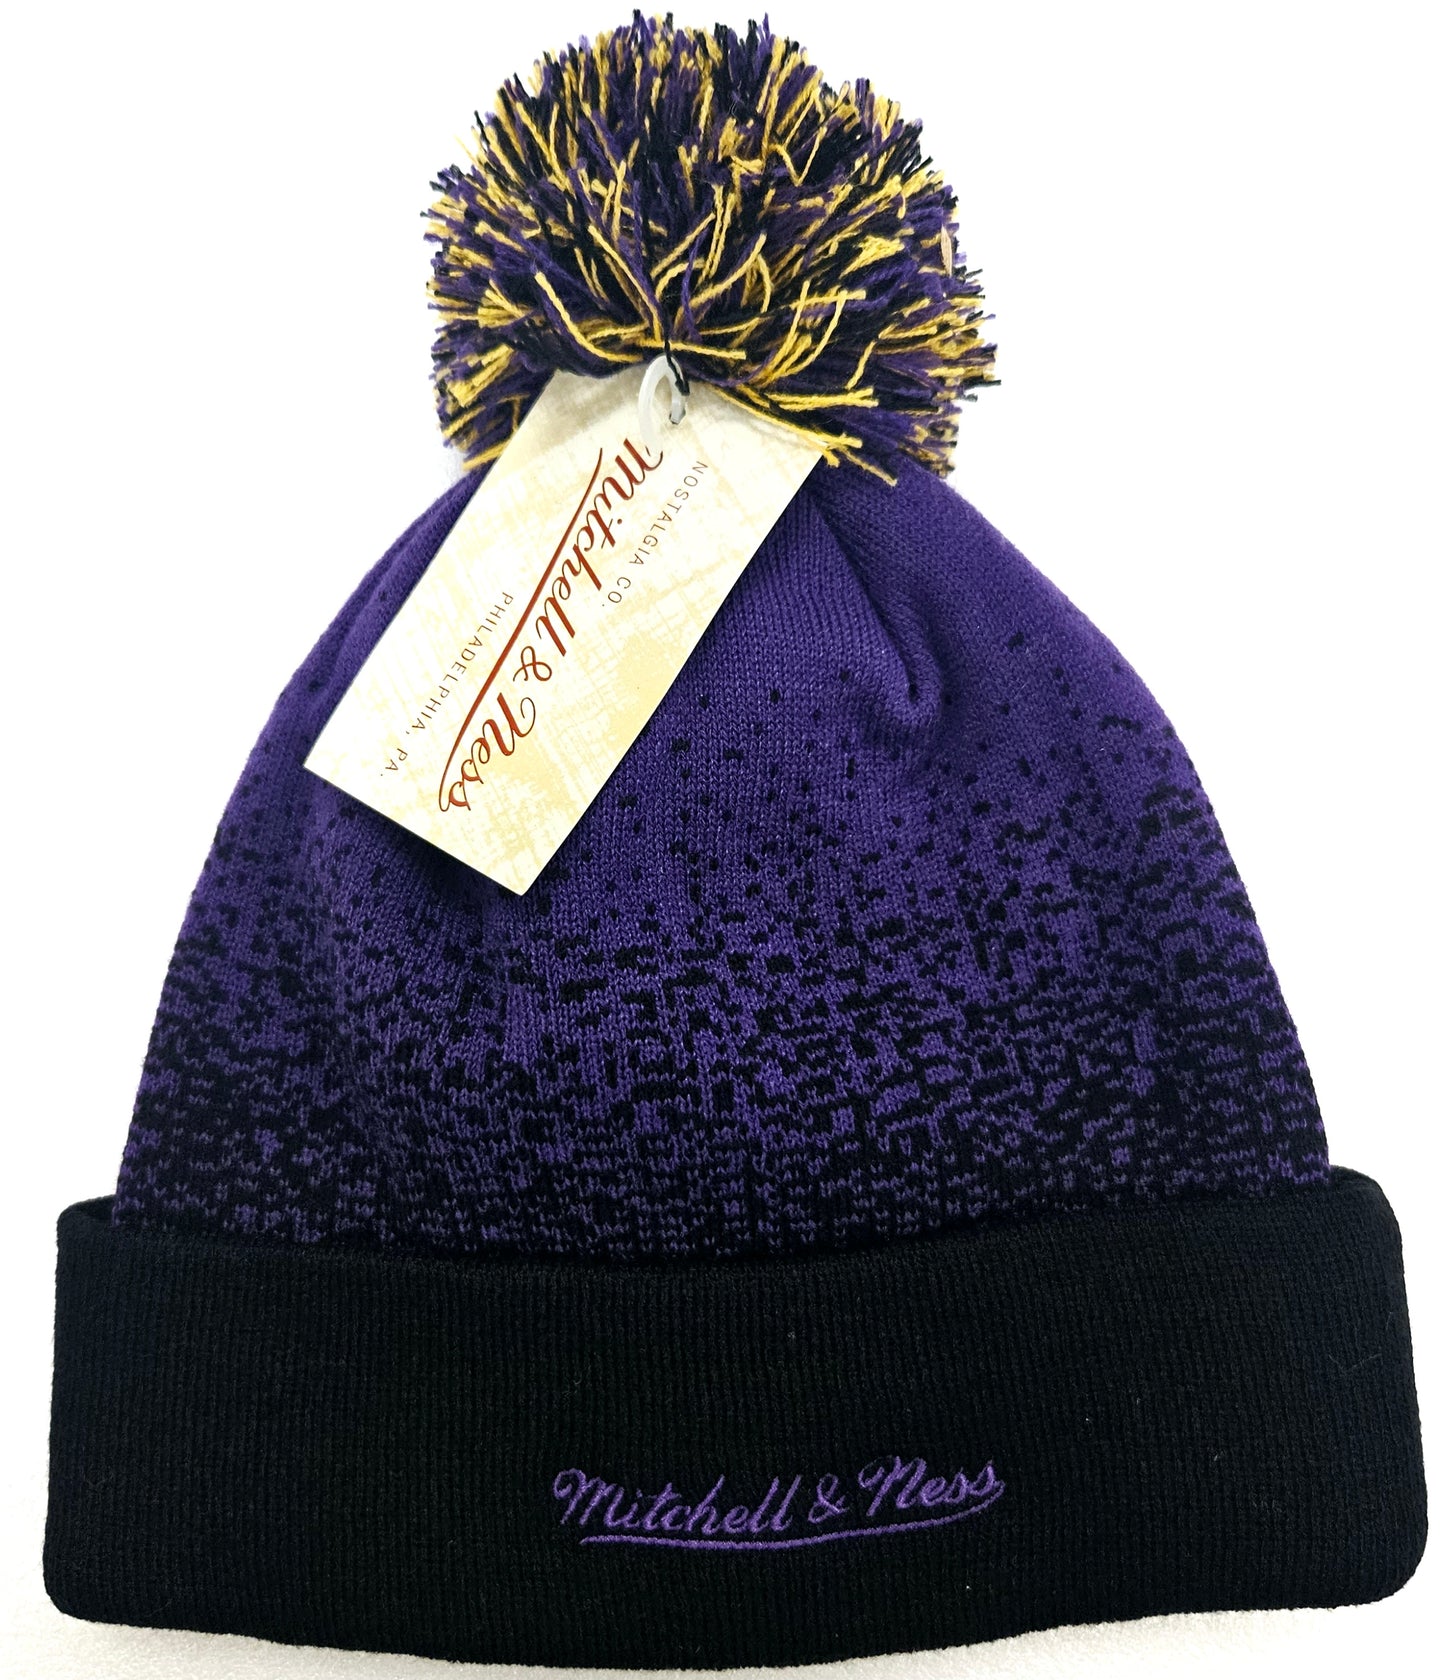 Classic Cuffed Beanie Hat - NBA Los Angeles Lakers